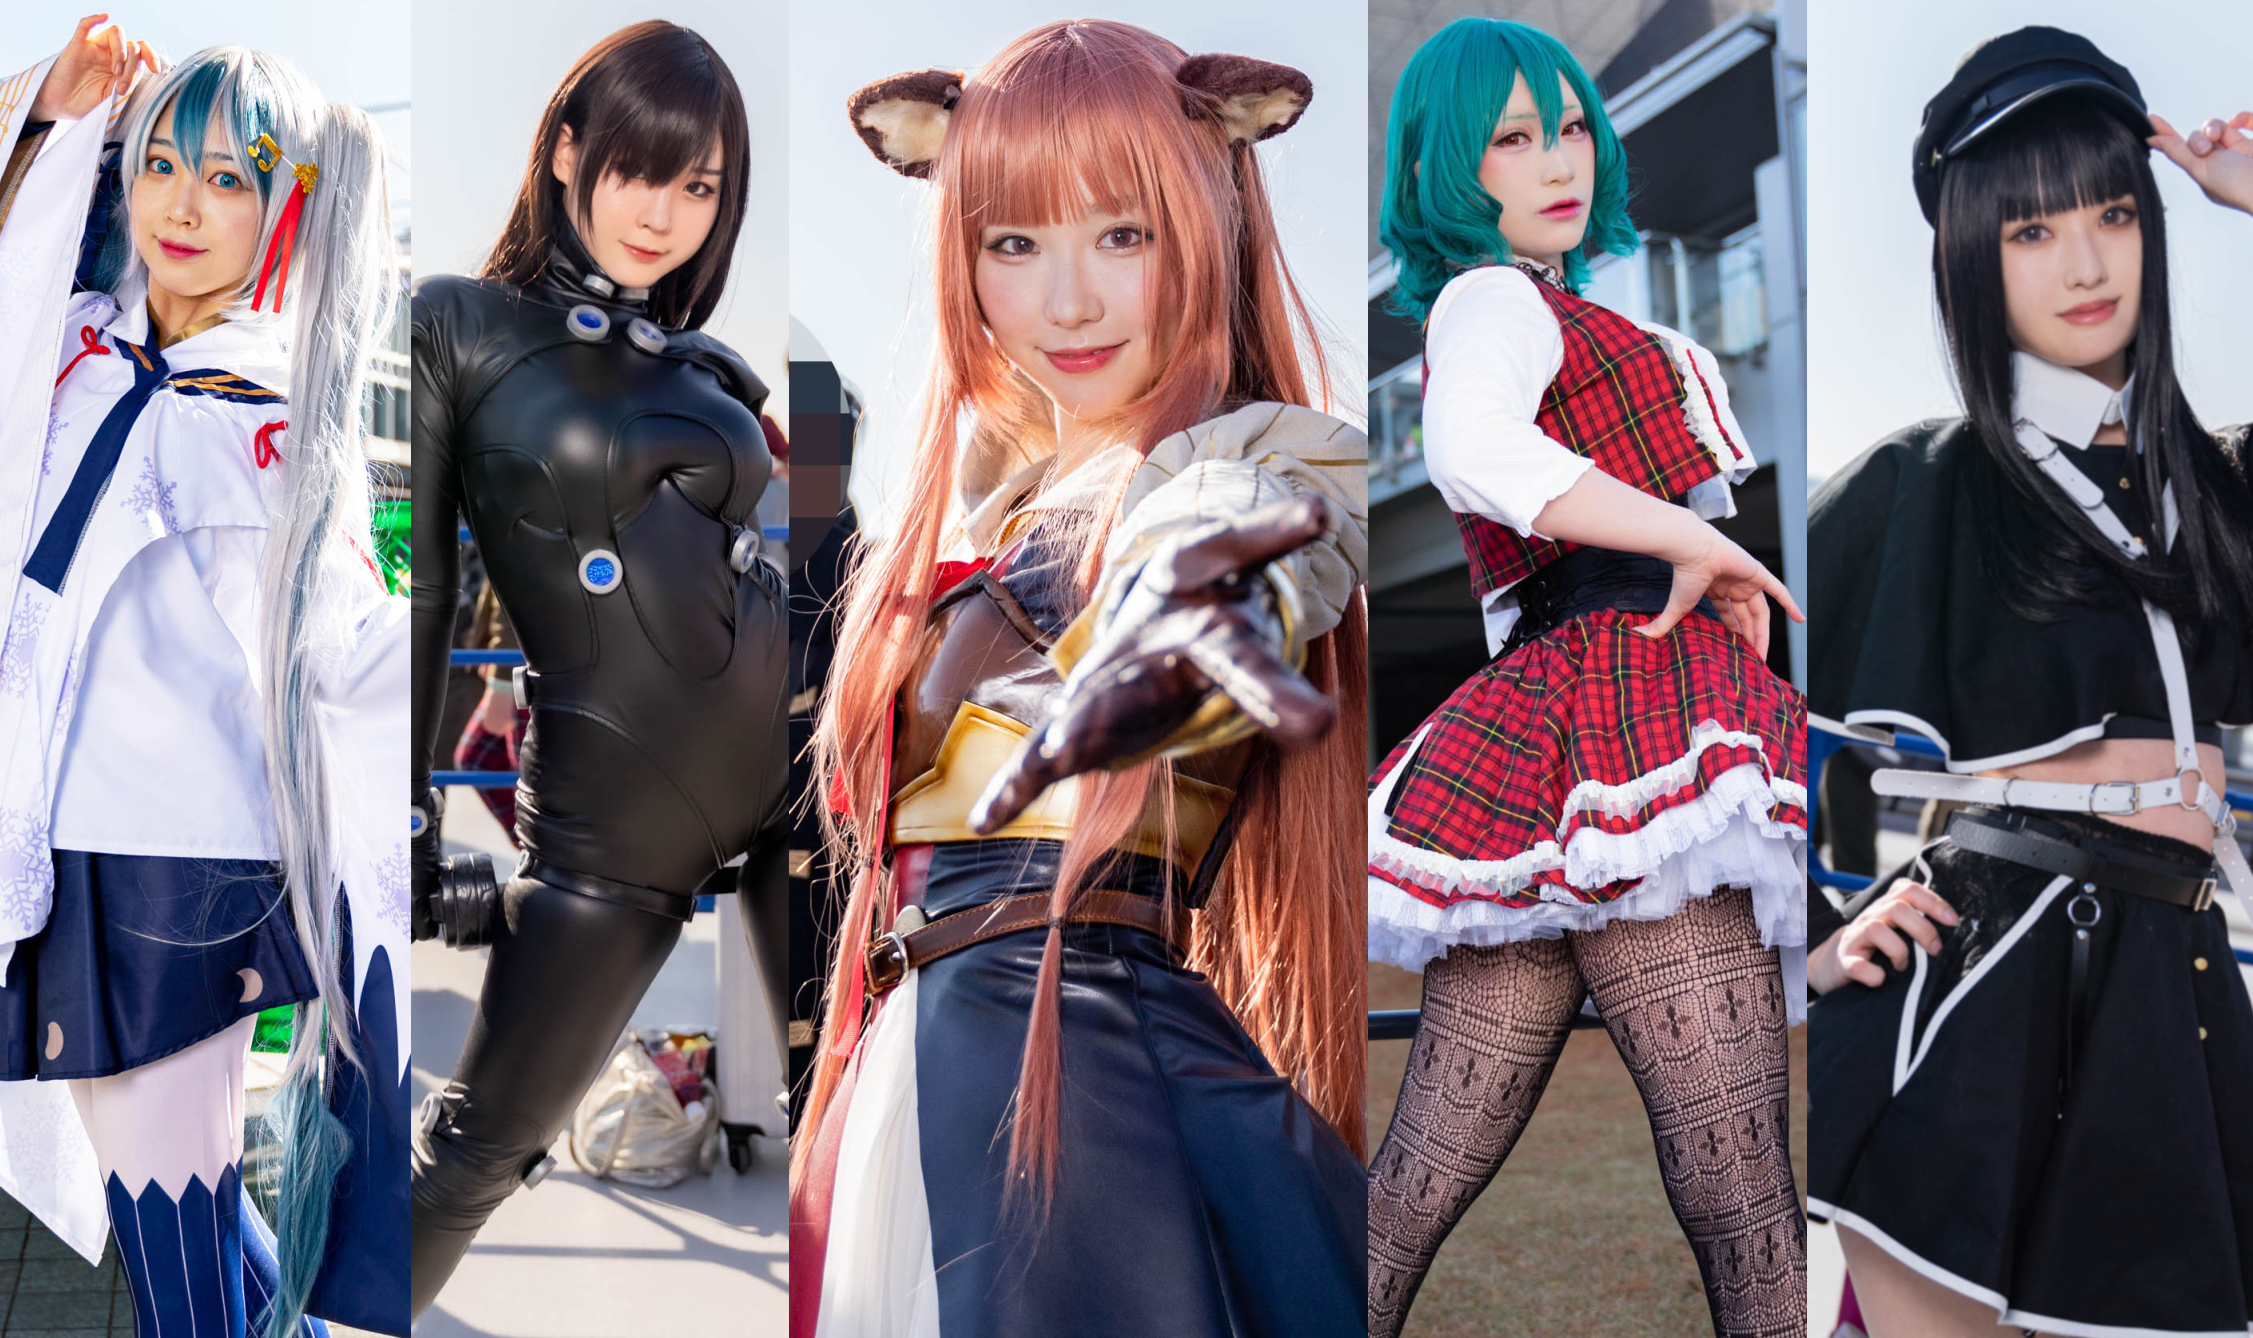 What Is Cosplay?